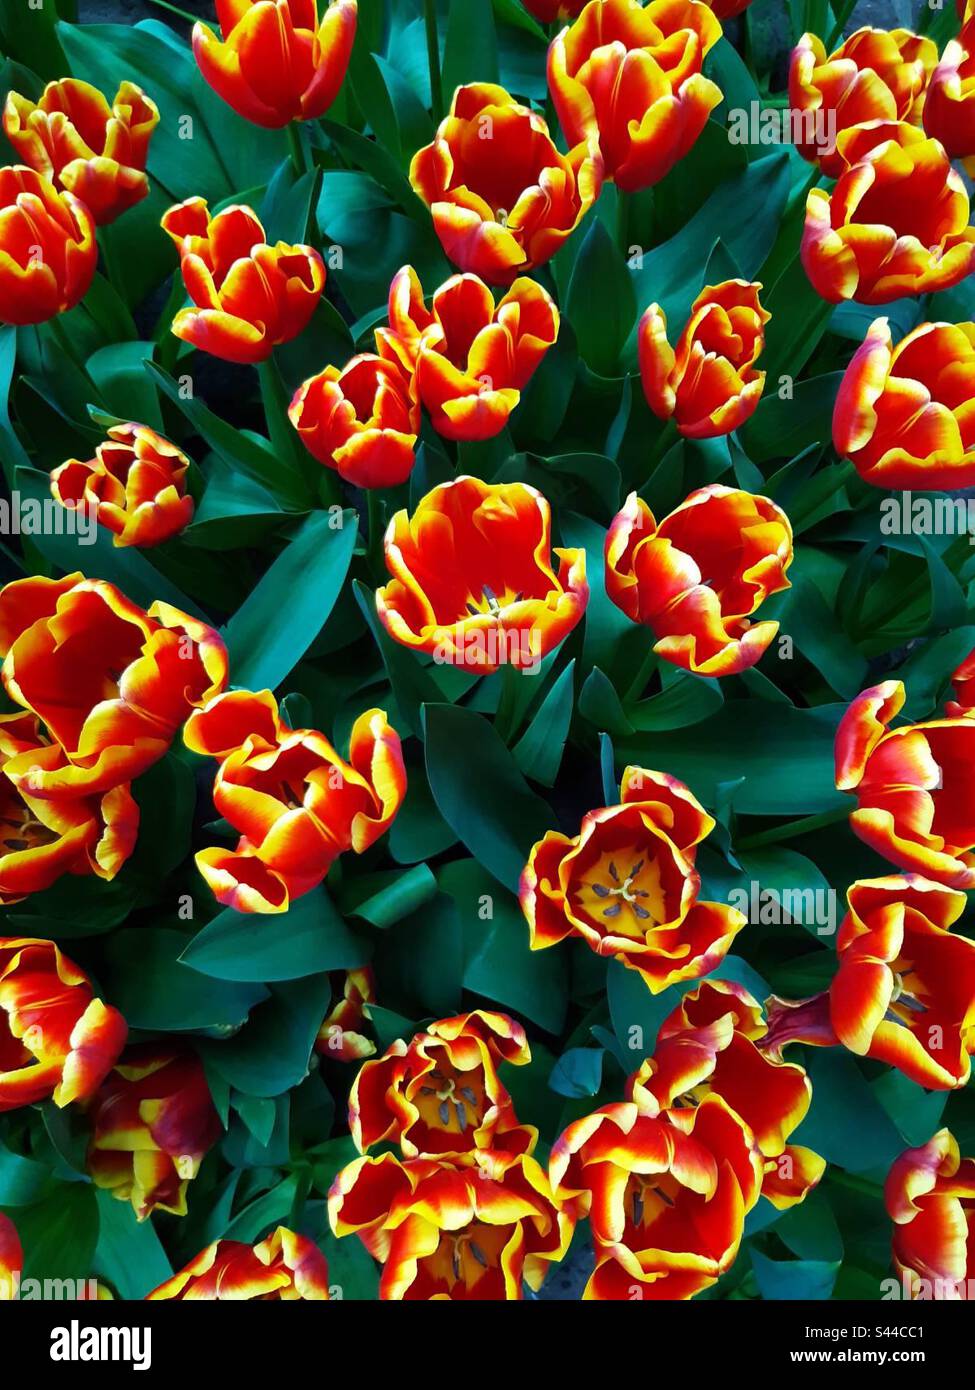 Blooming red-yellow tulips Stock Photo